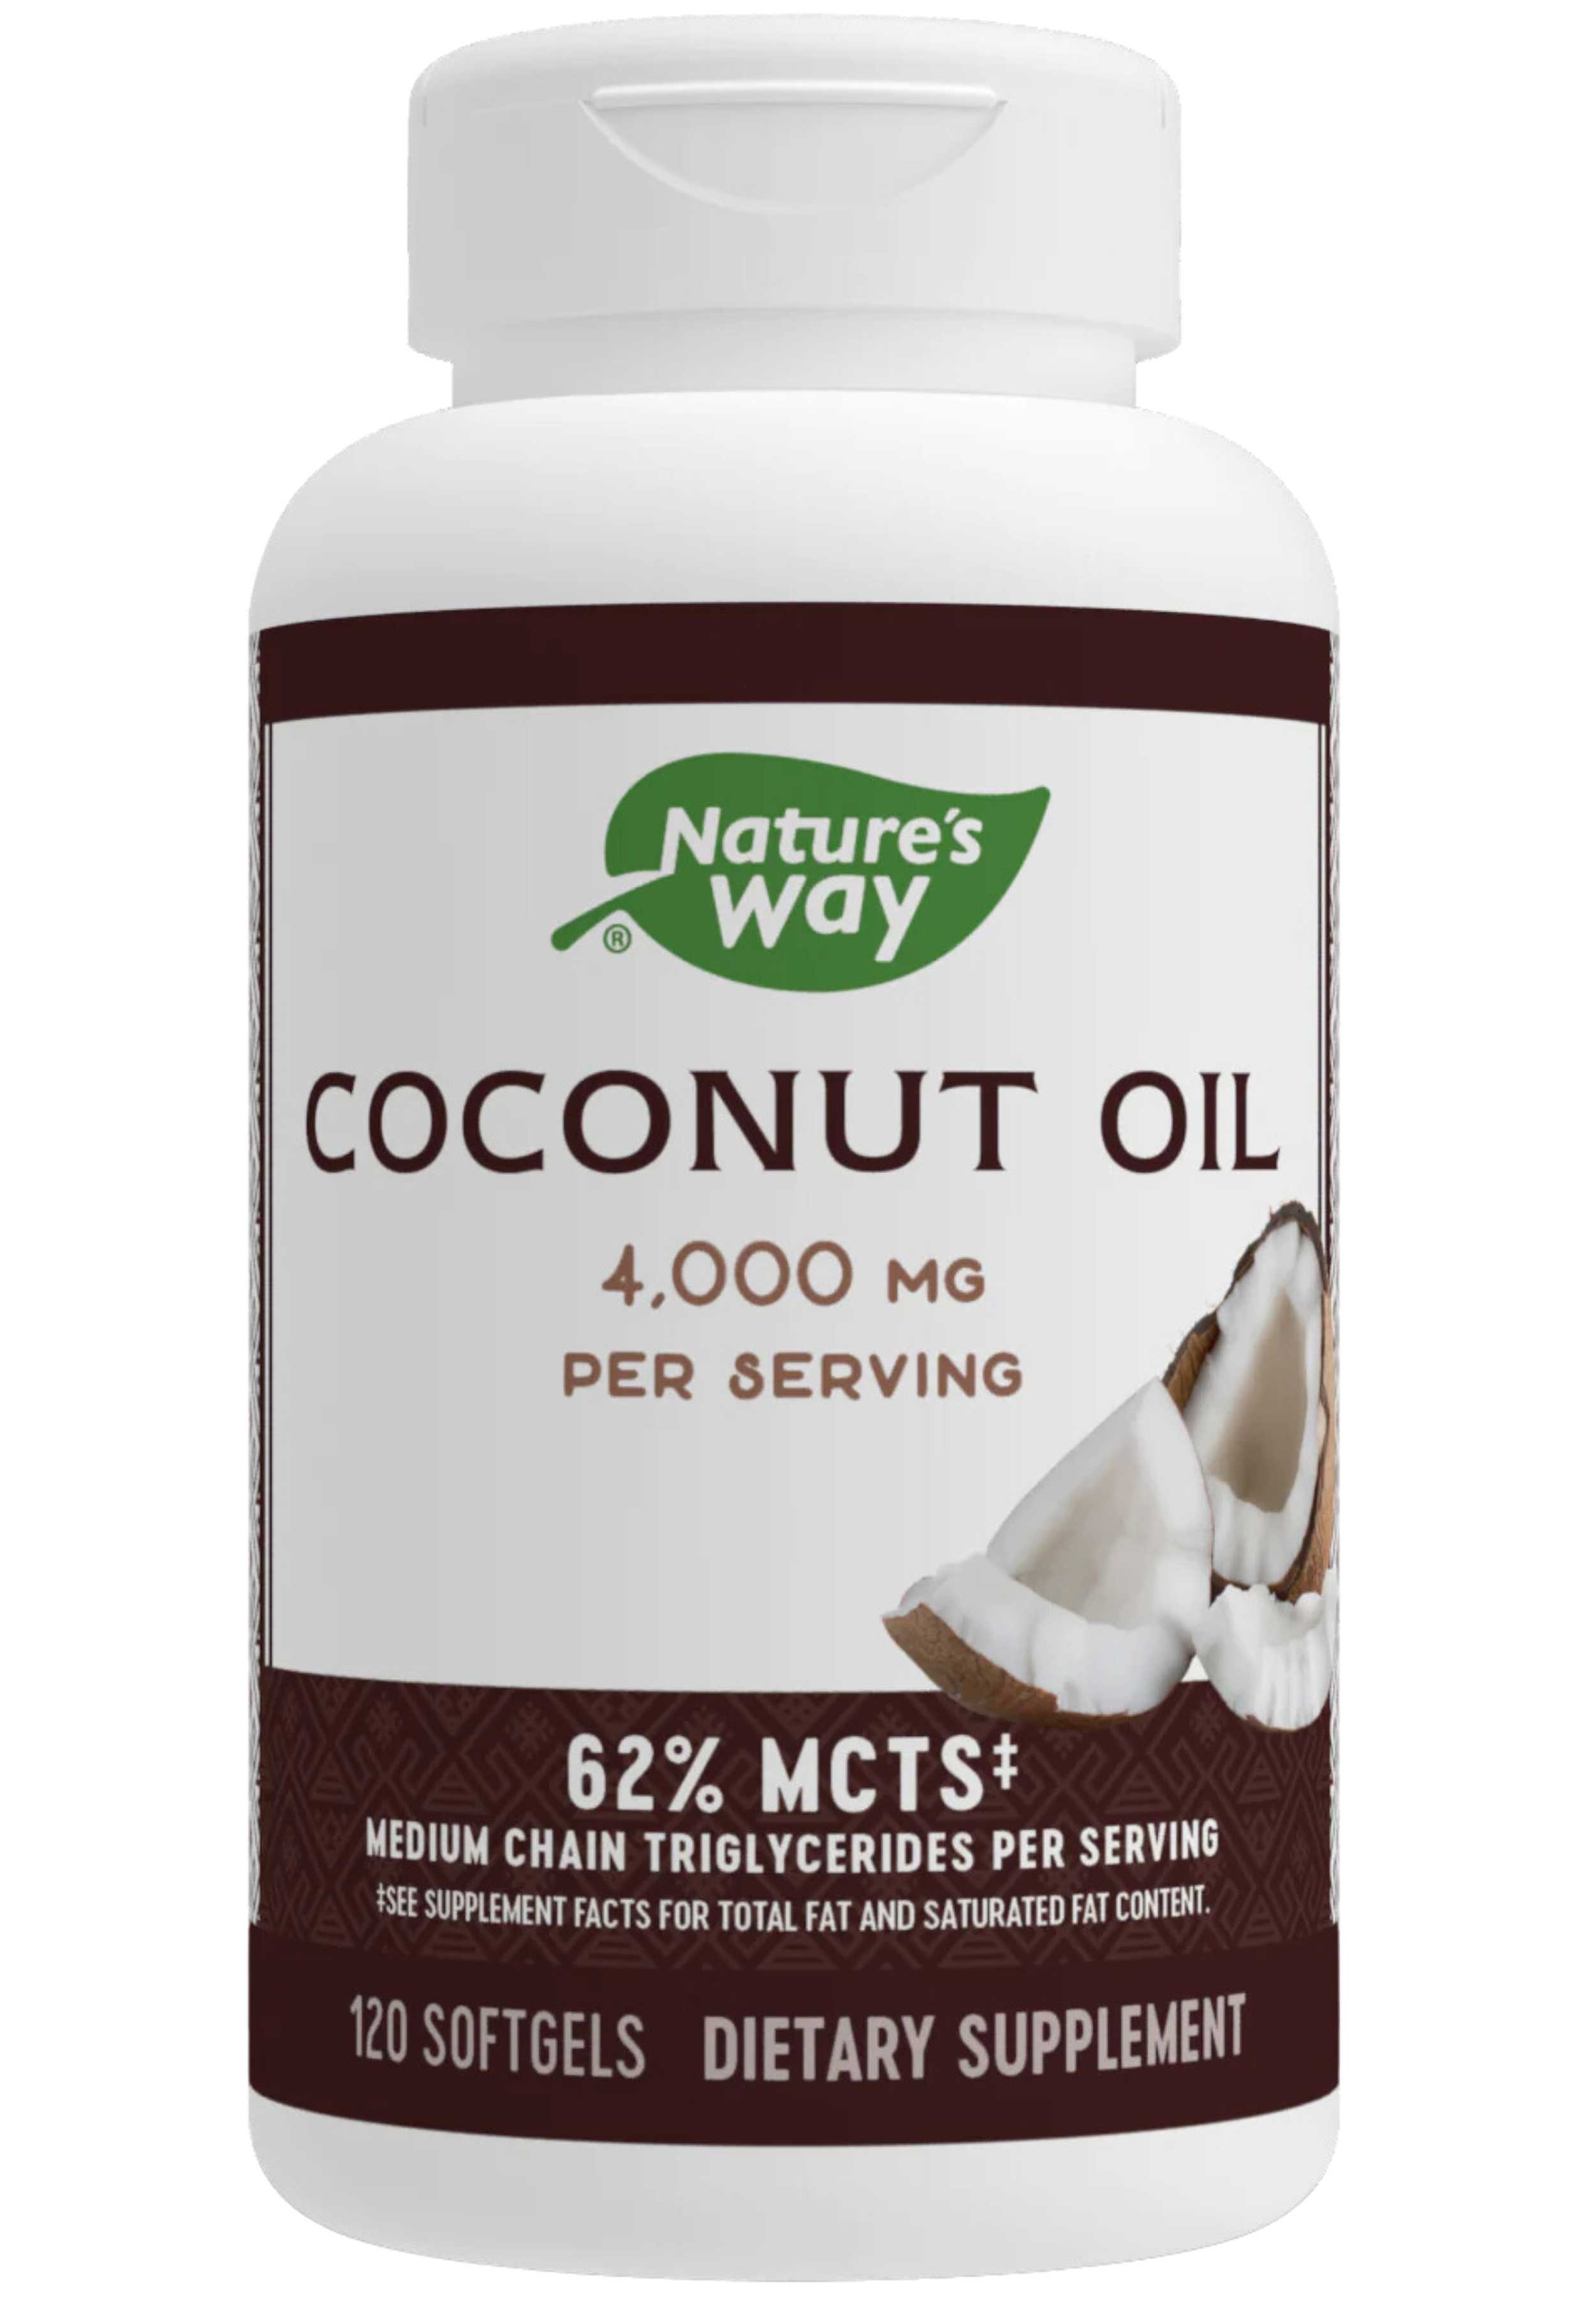 Nature's Way Coconut Oil 4000 mg